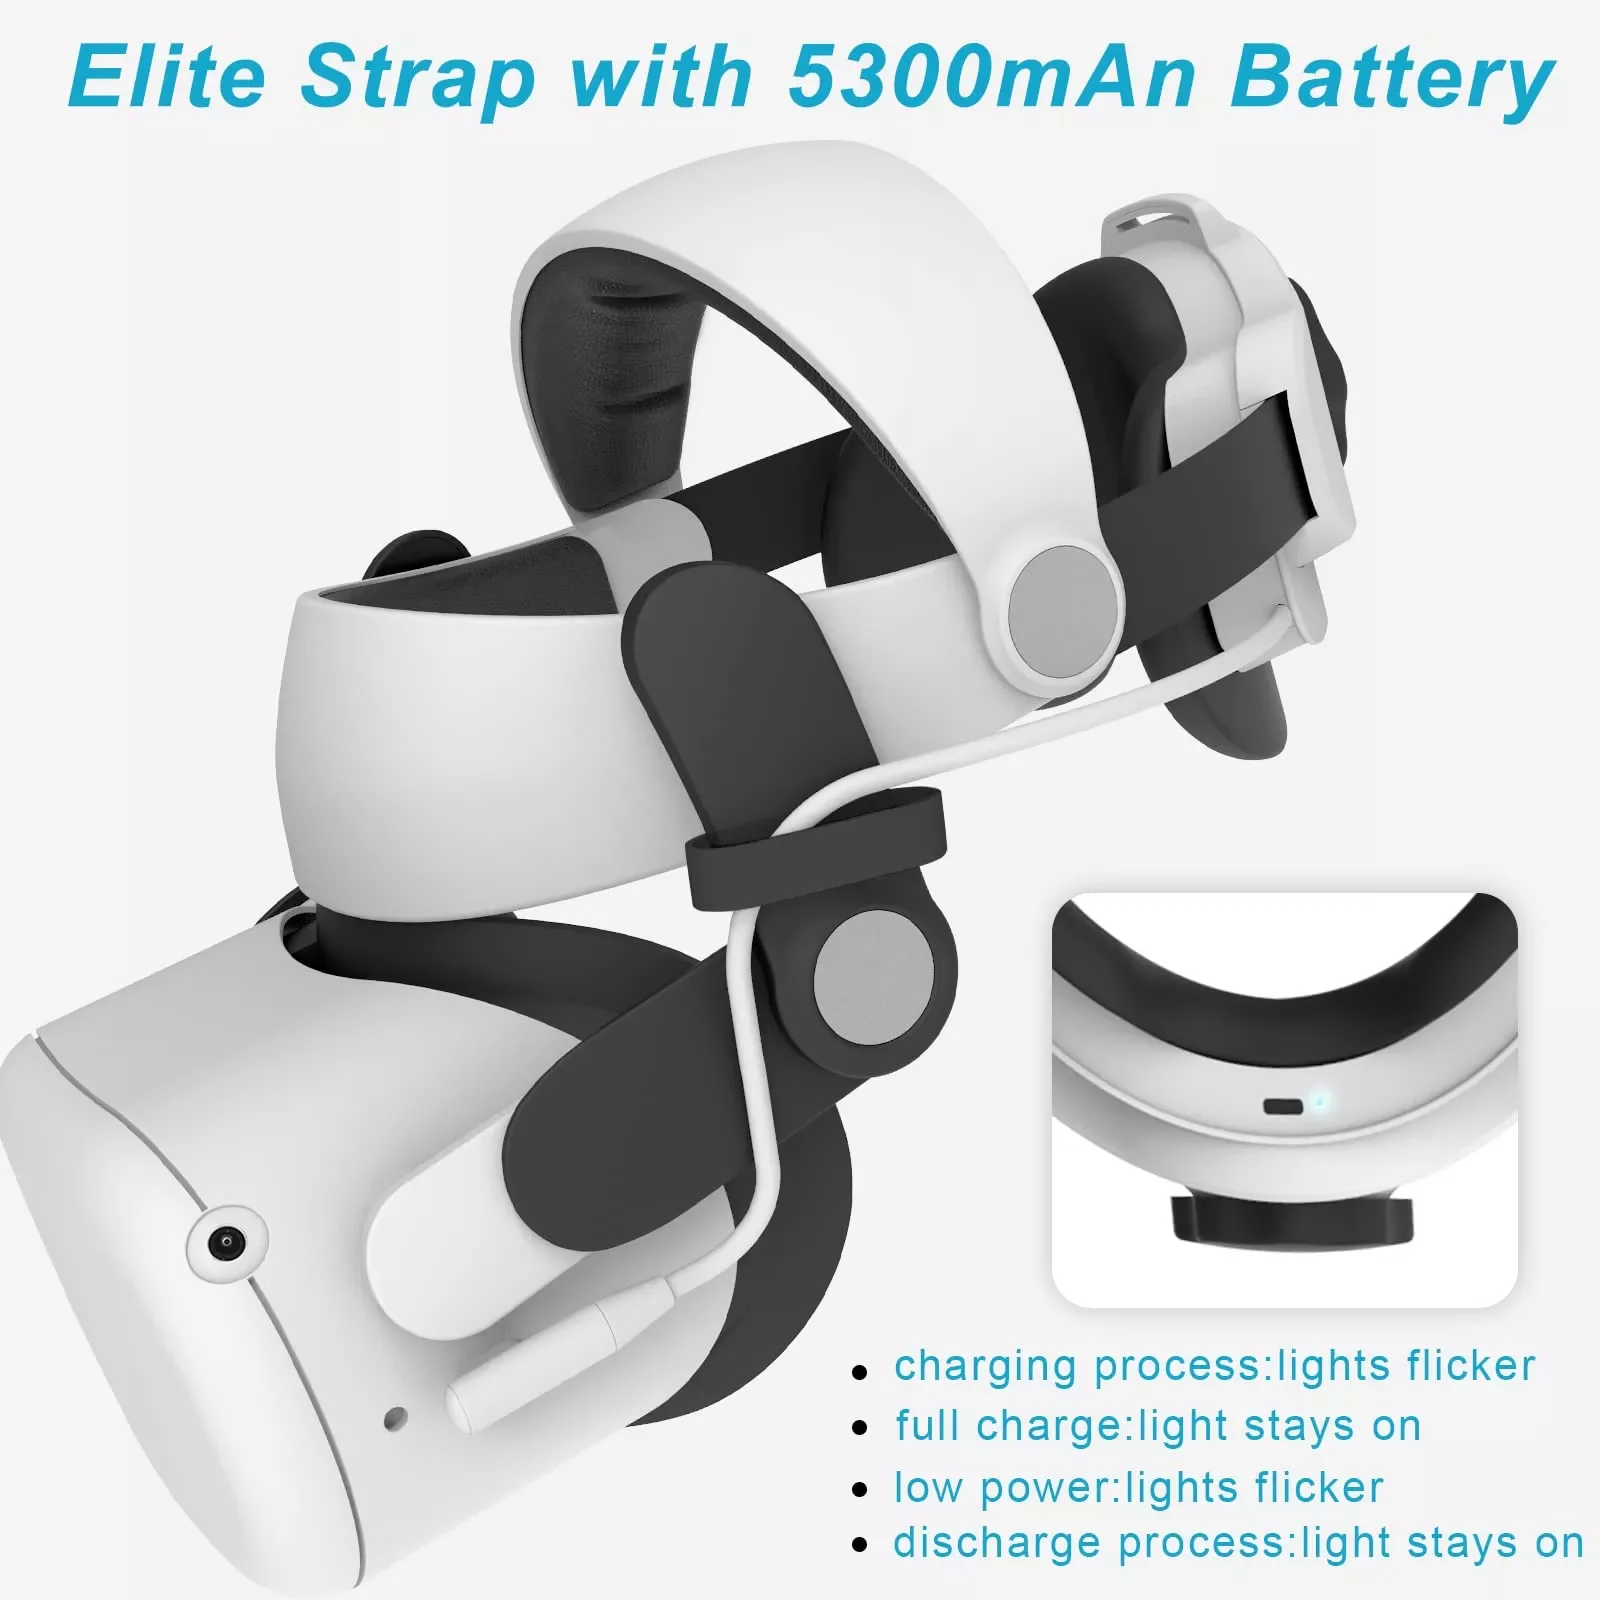 For Oculus Quest 2 Battery Pack 5300mhA Elite Strap with Battery Halo Strap VR Power Bank for Meta Oculus Quest 2 Accessories enlarge